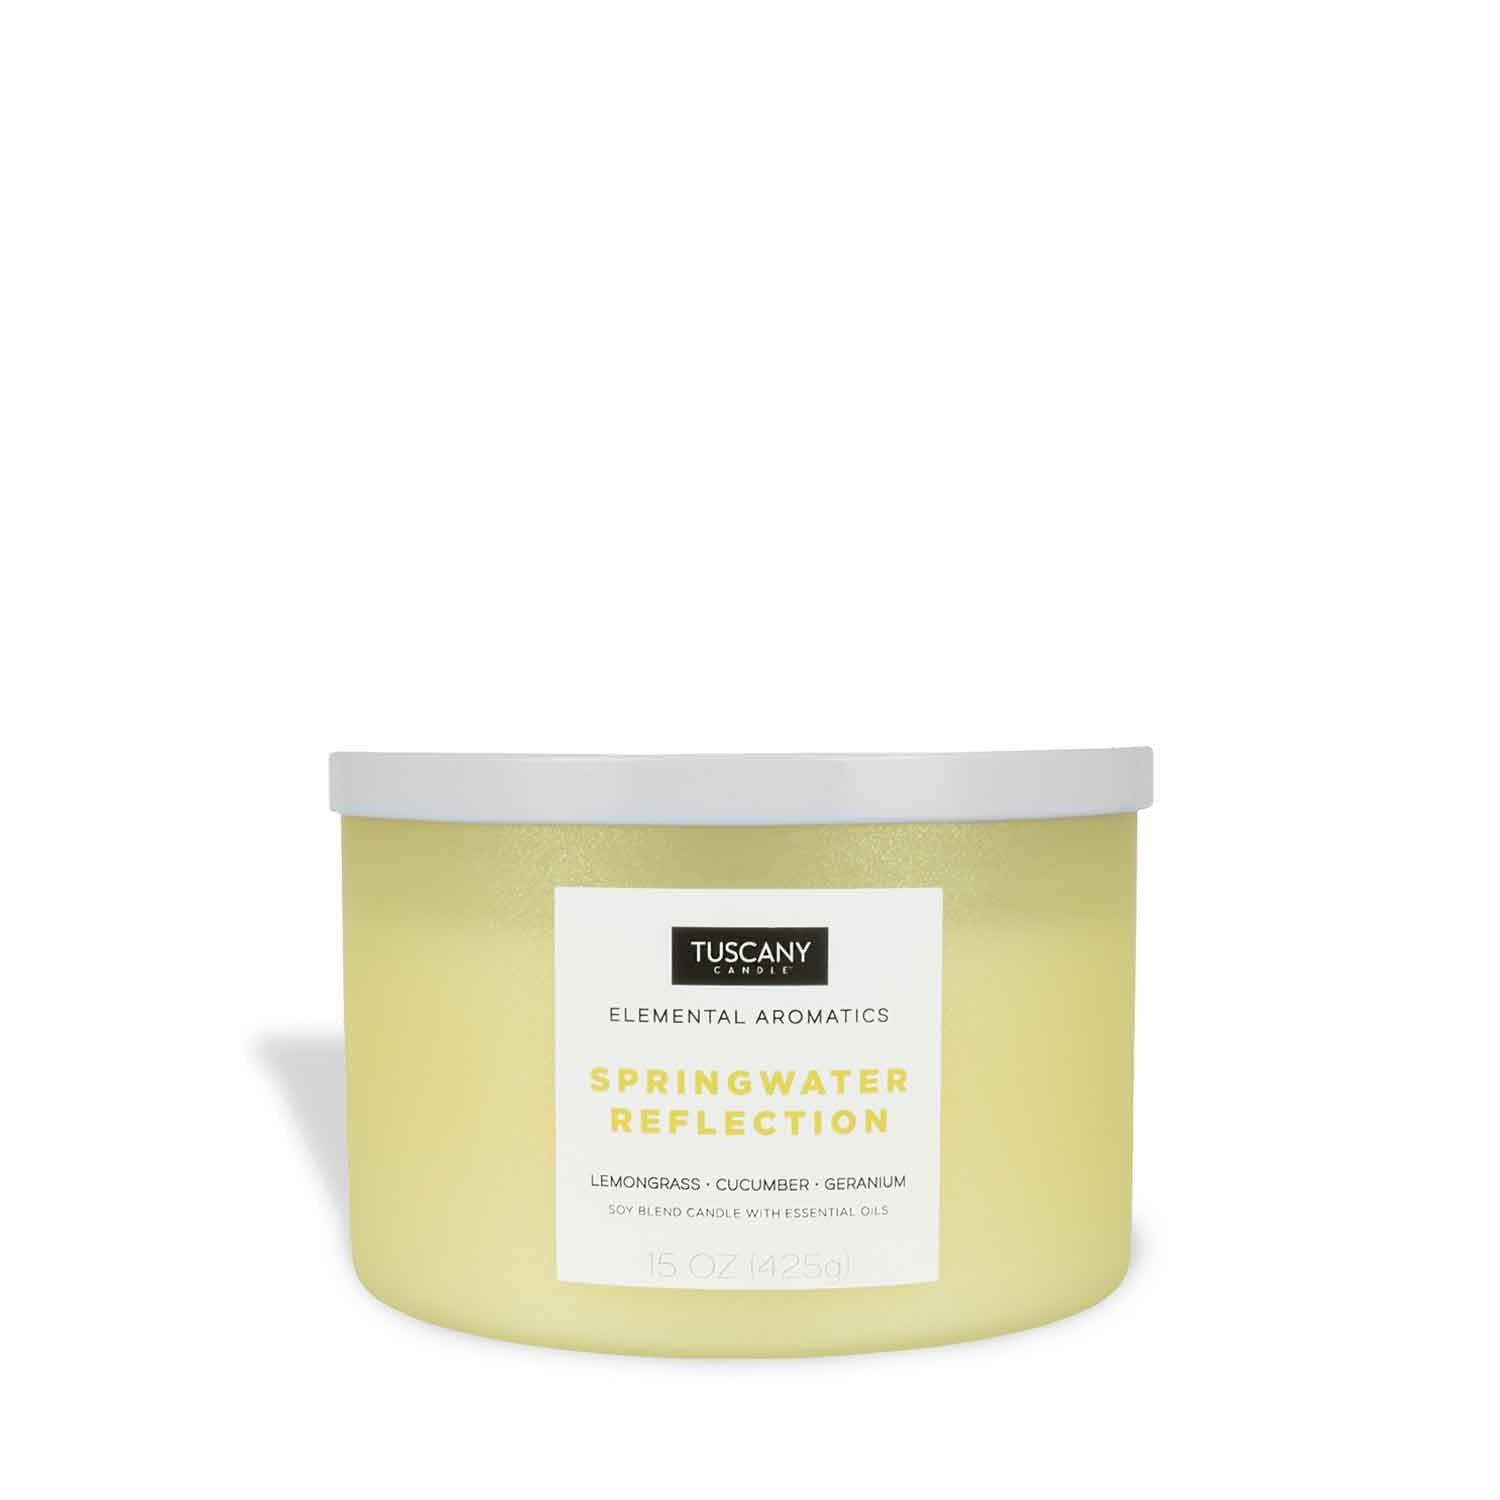 A Springwater Reflection scented jar candle (15 oz) from the Elemental Aromatics Collection by Tuscany Candle, made with a soy wax blend, displayed on a white background.